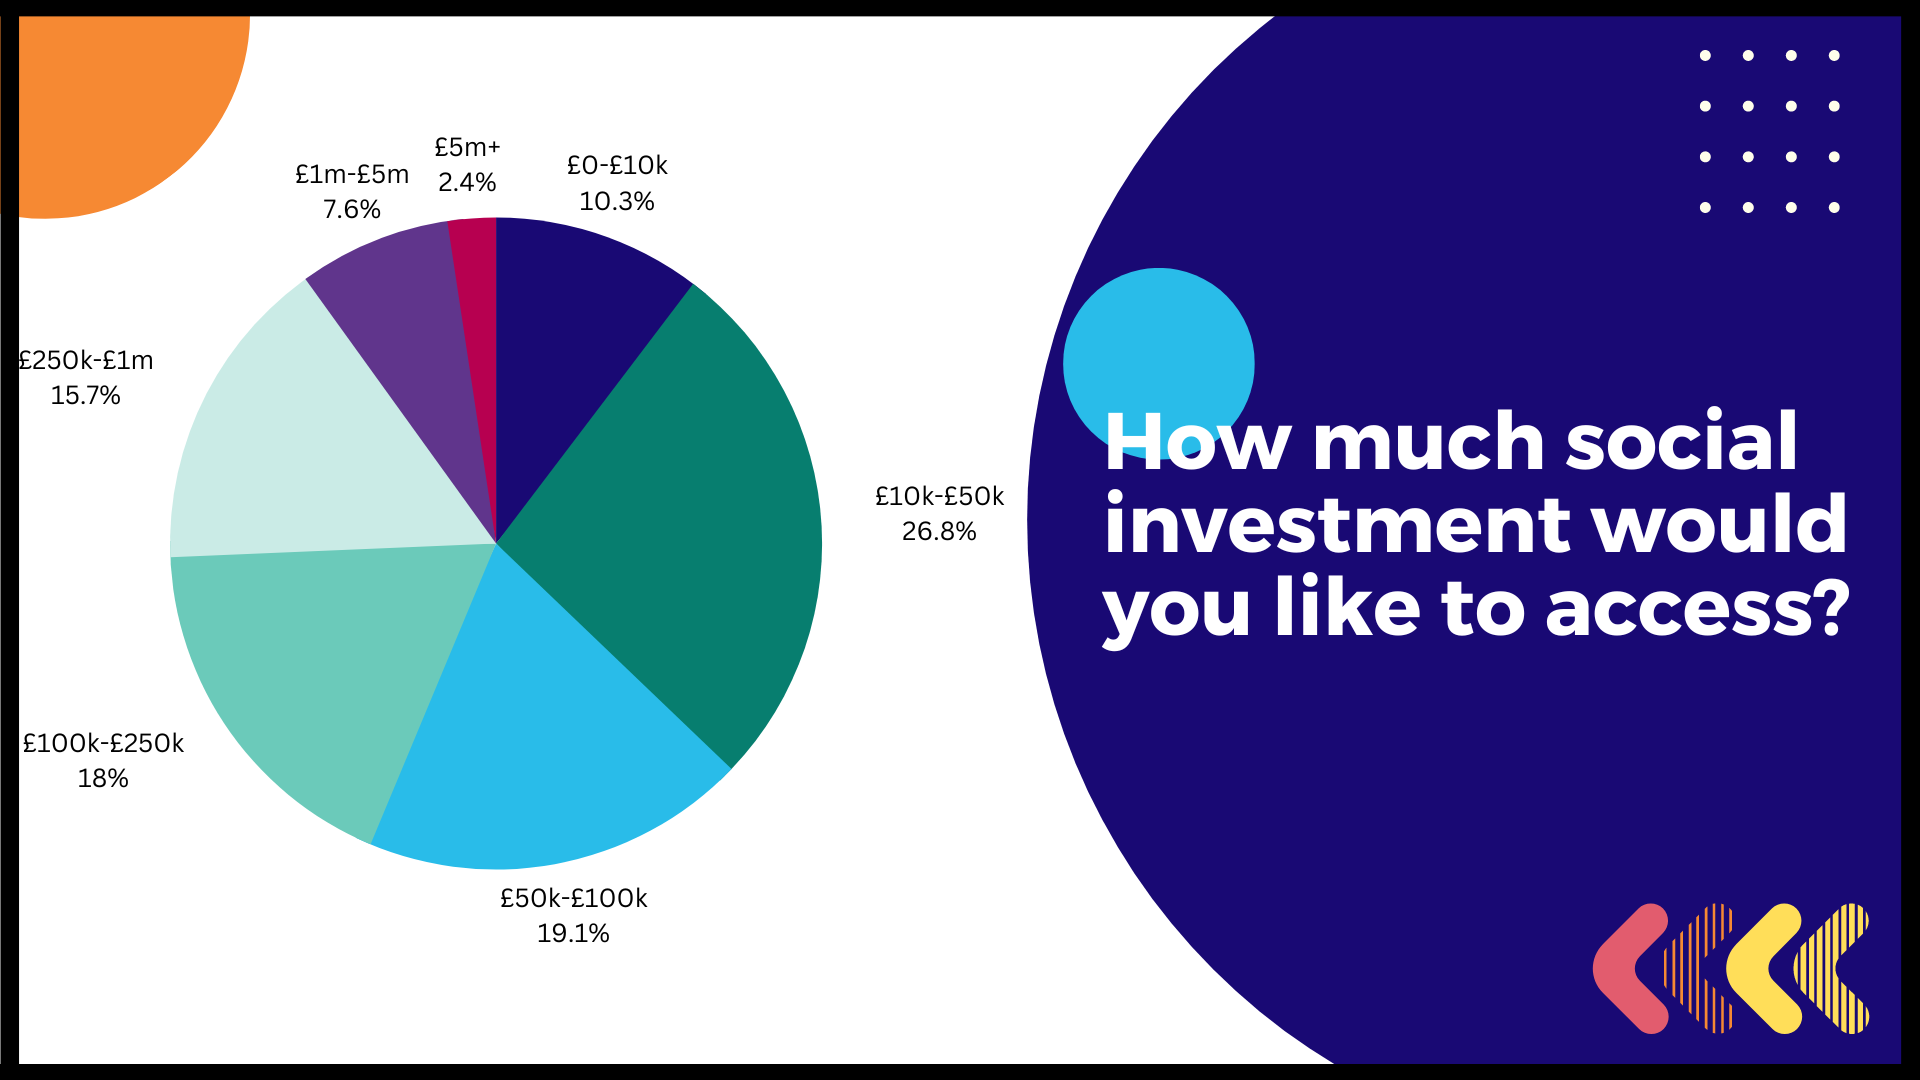 How much social investment would you like to access?